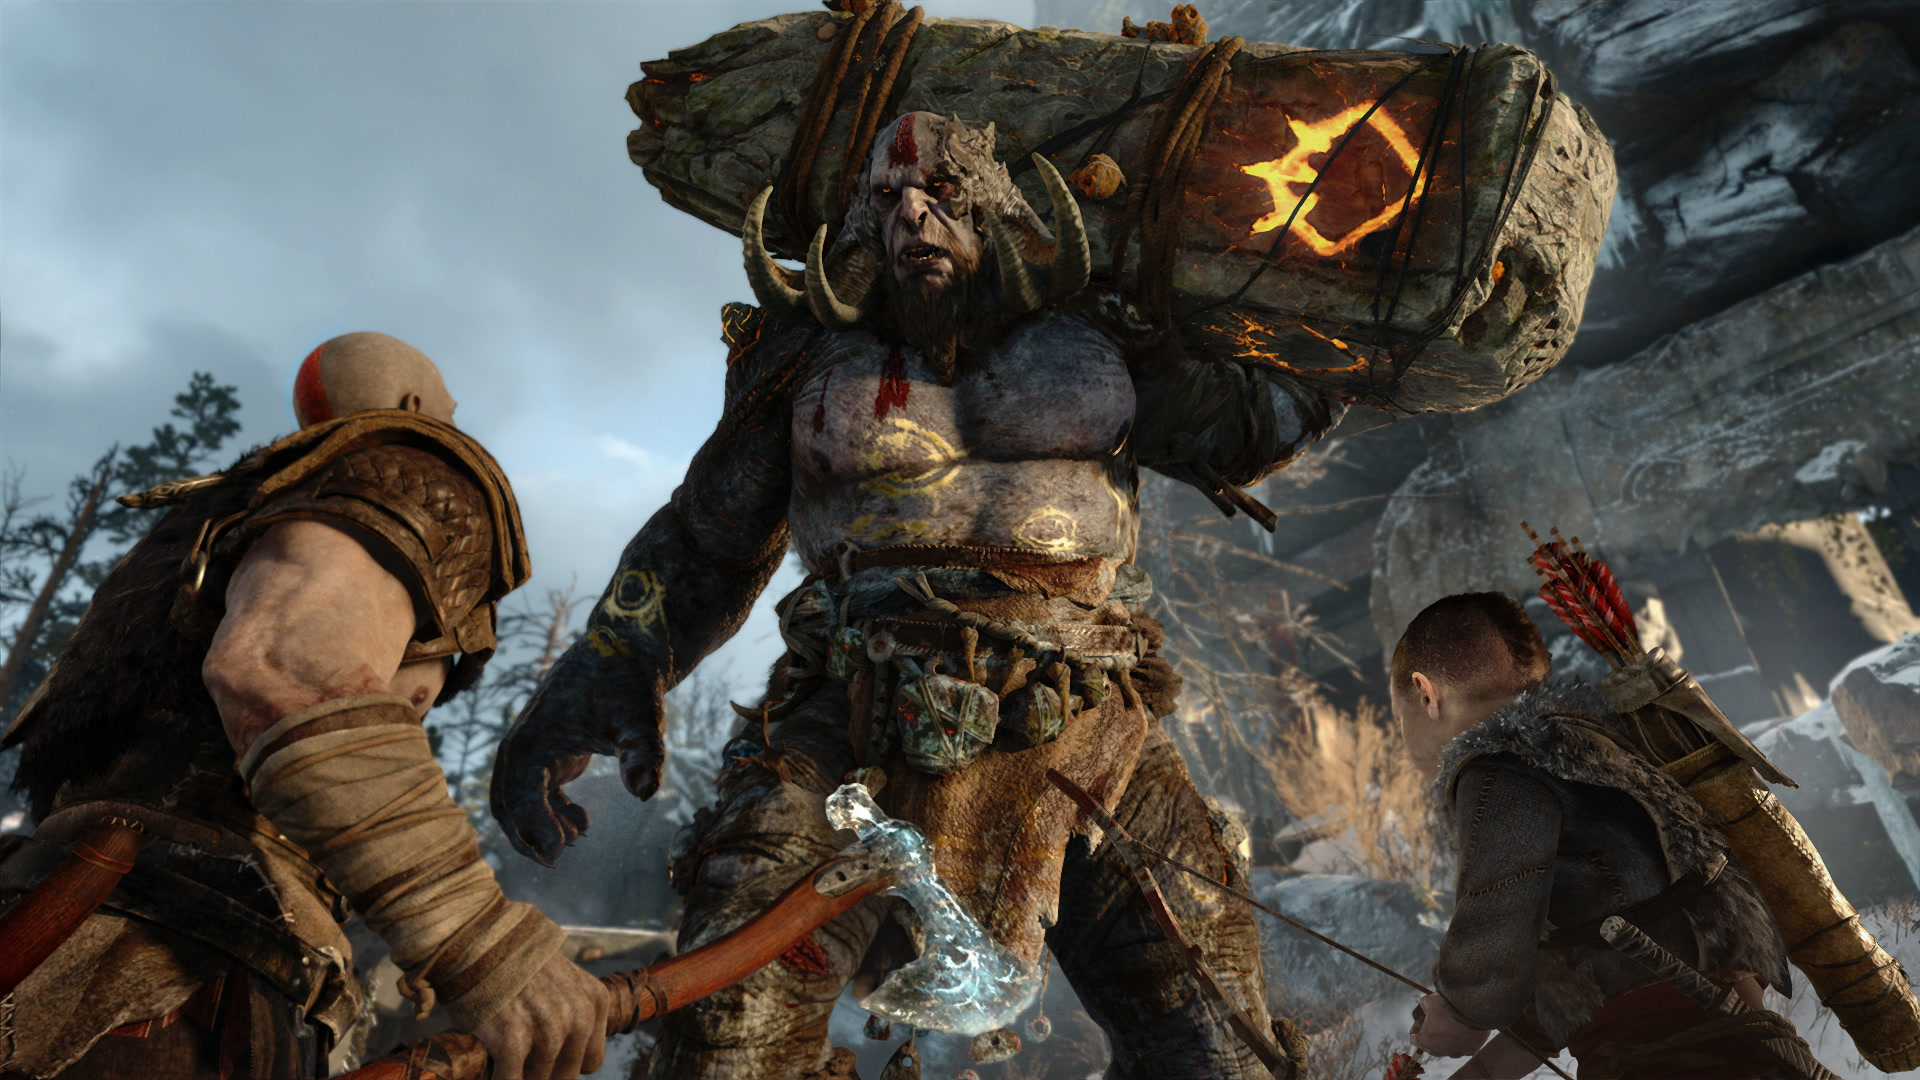 How has Spartan Rage changed in God of War Ragnarok? Increasing meter,  different forms, and more explained